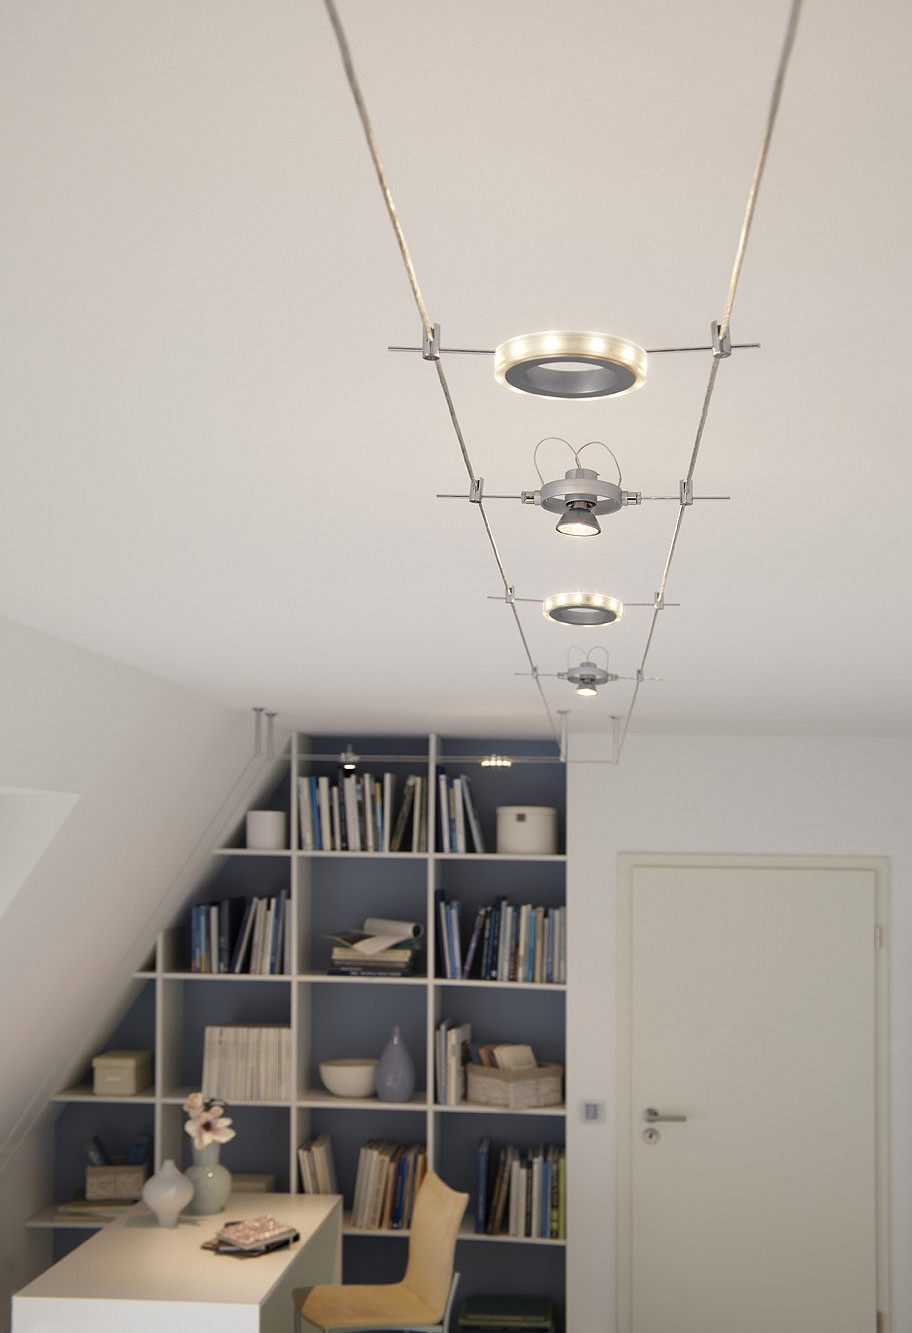 Wire Track Lighting System